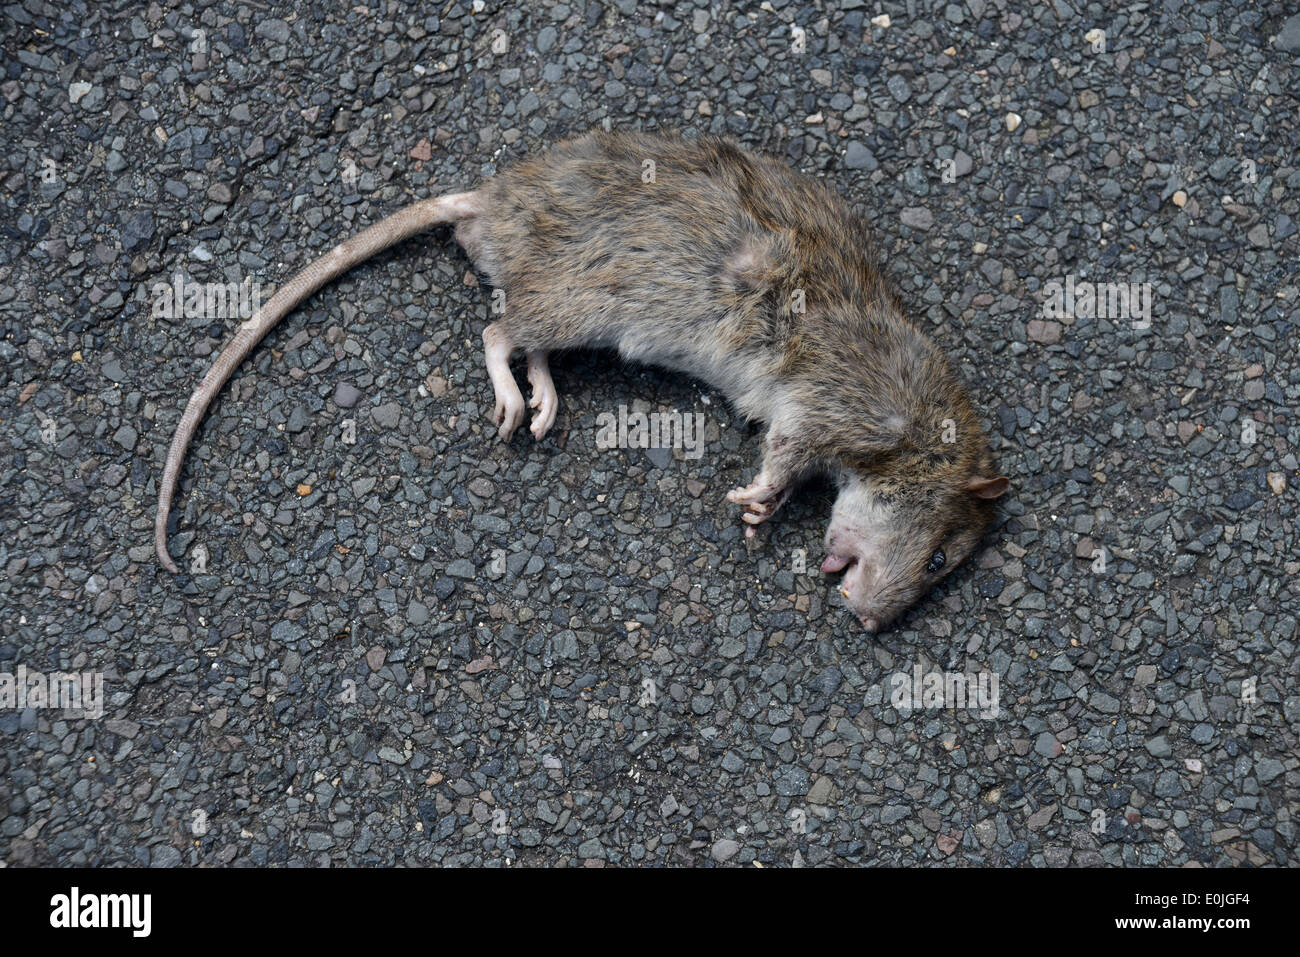 A giant rat pictured on the street in a residential area of Woodingdean, Brighton, East Sussex, UK. Stock Photo